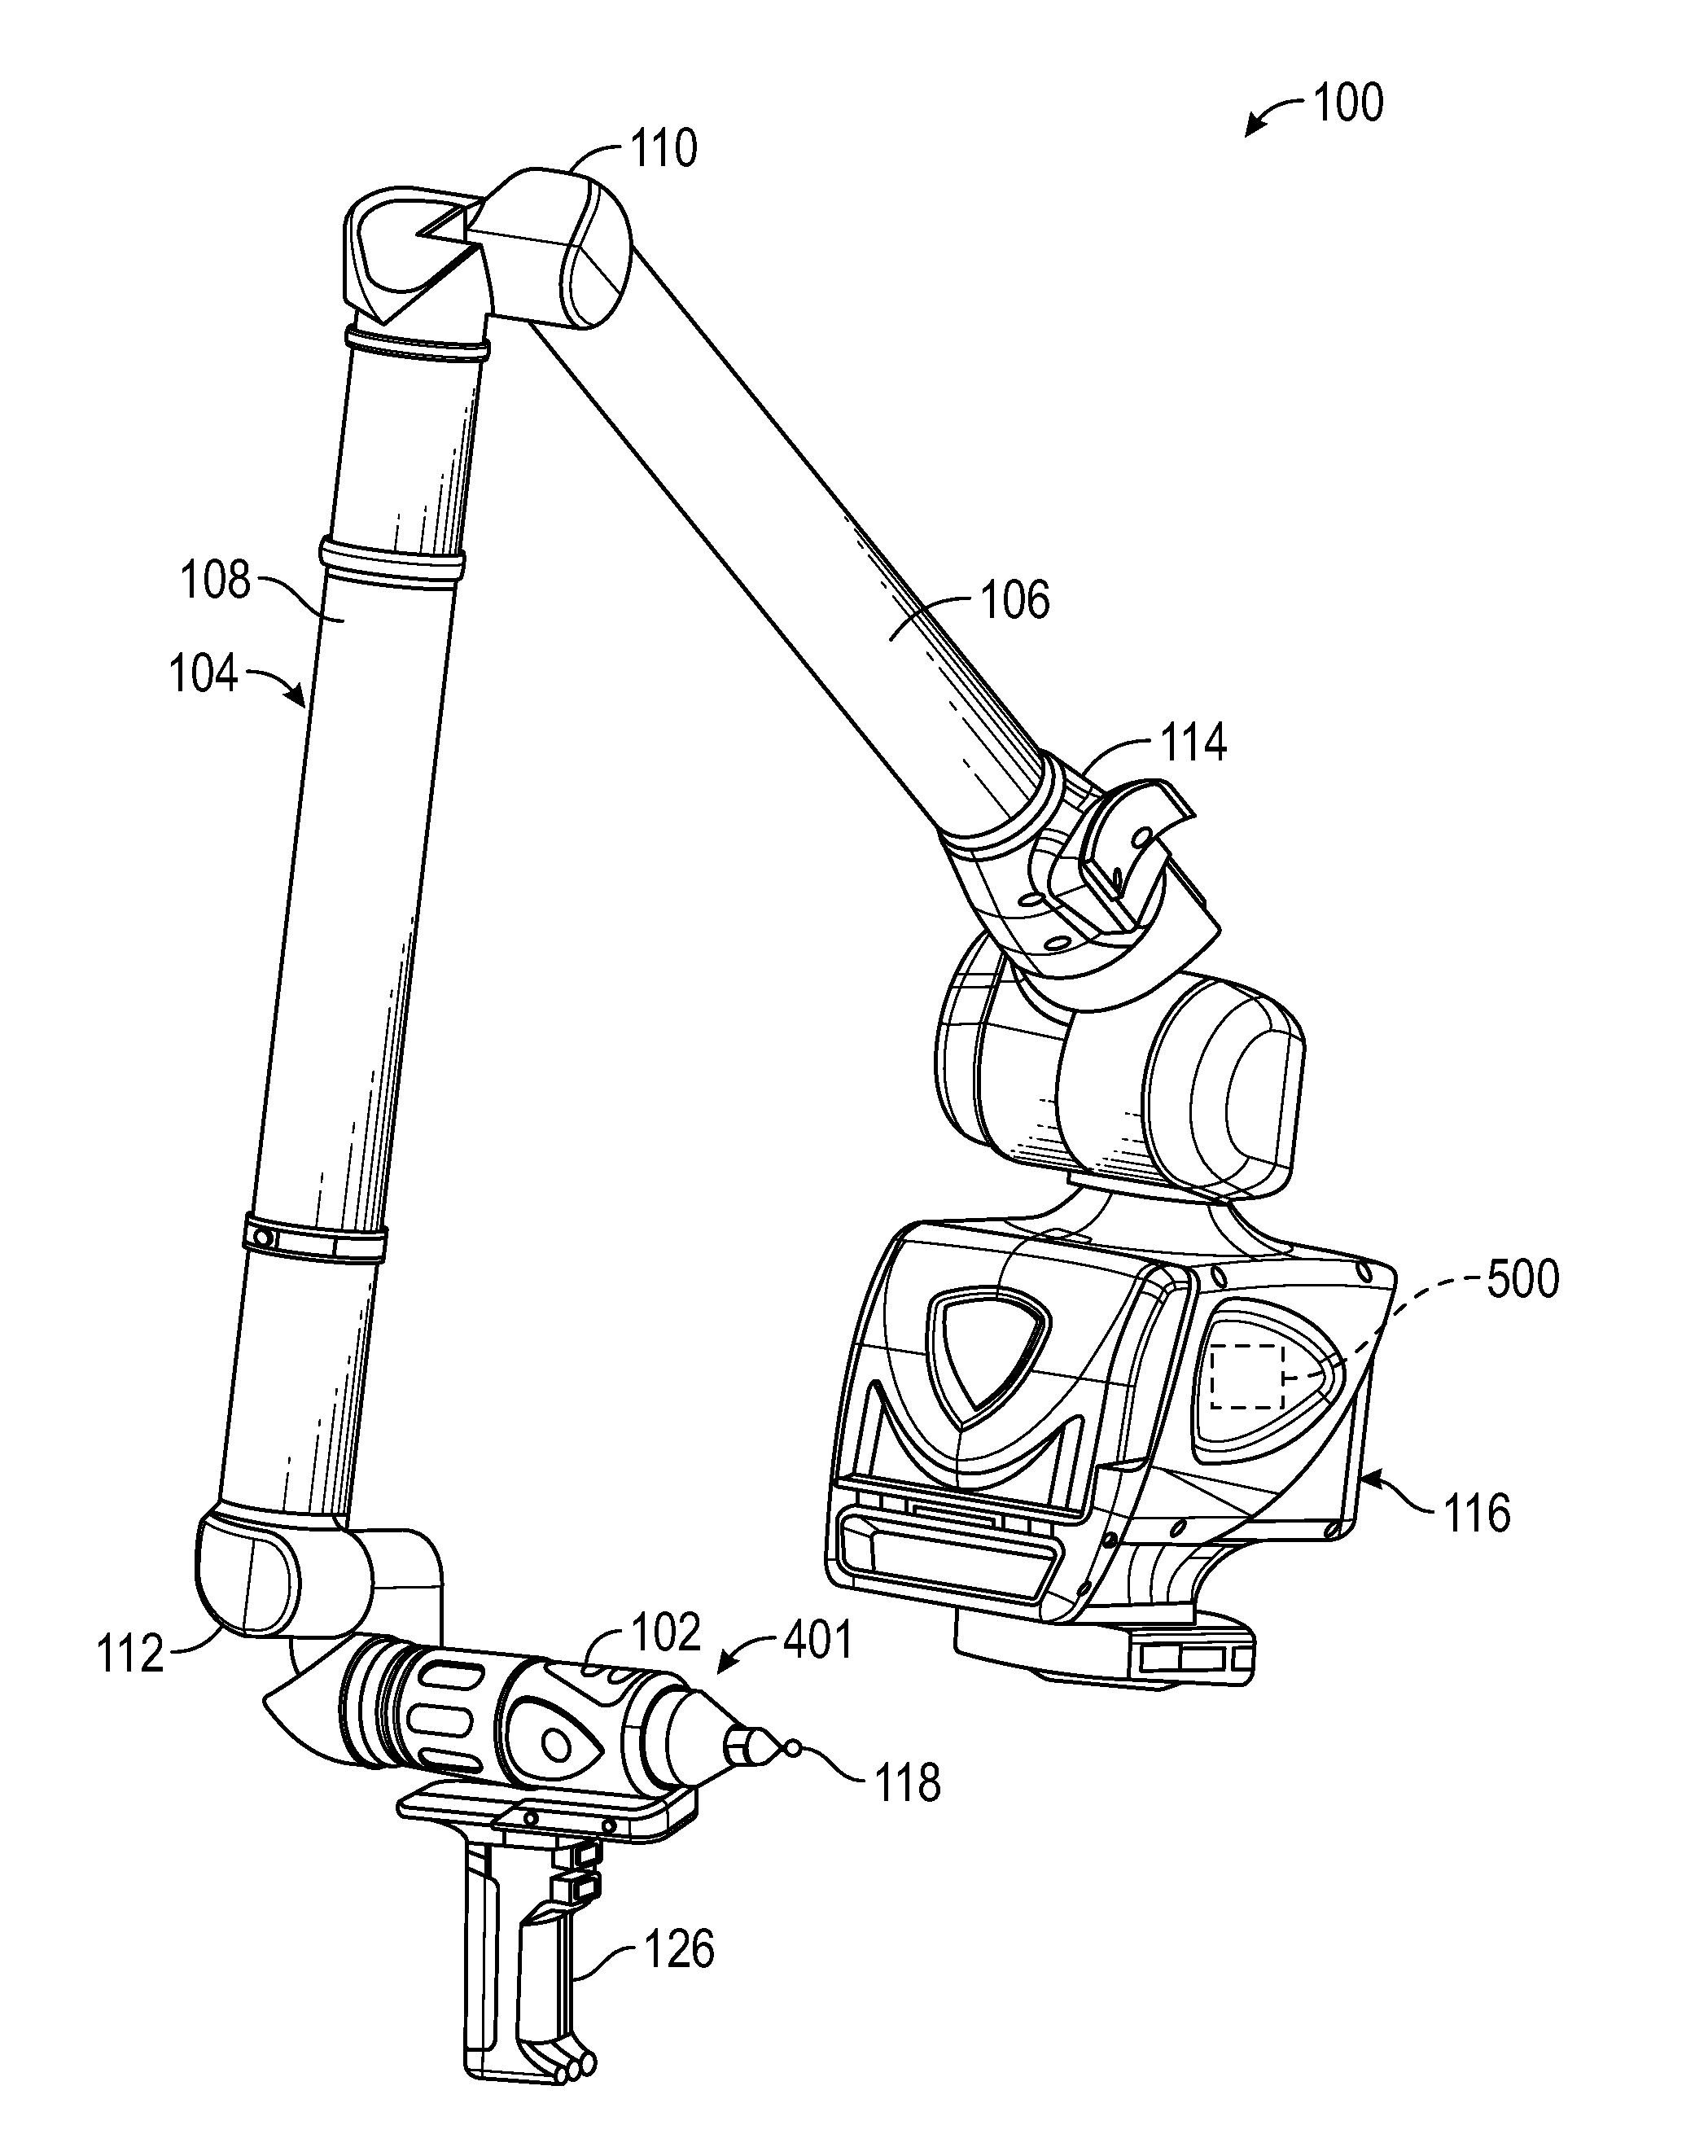 Metrology instrument system and method of operating